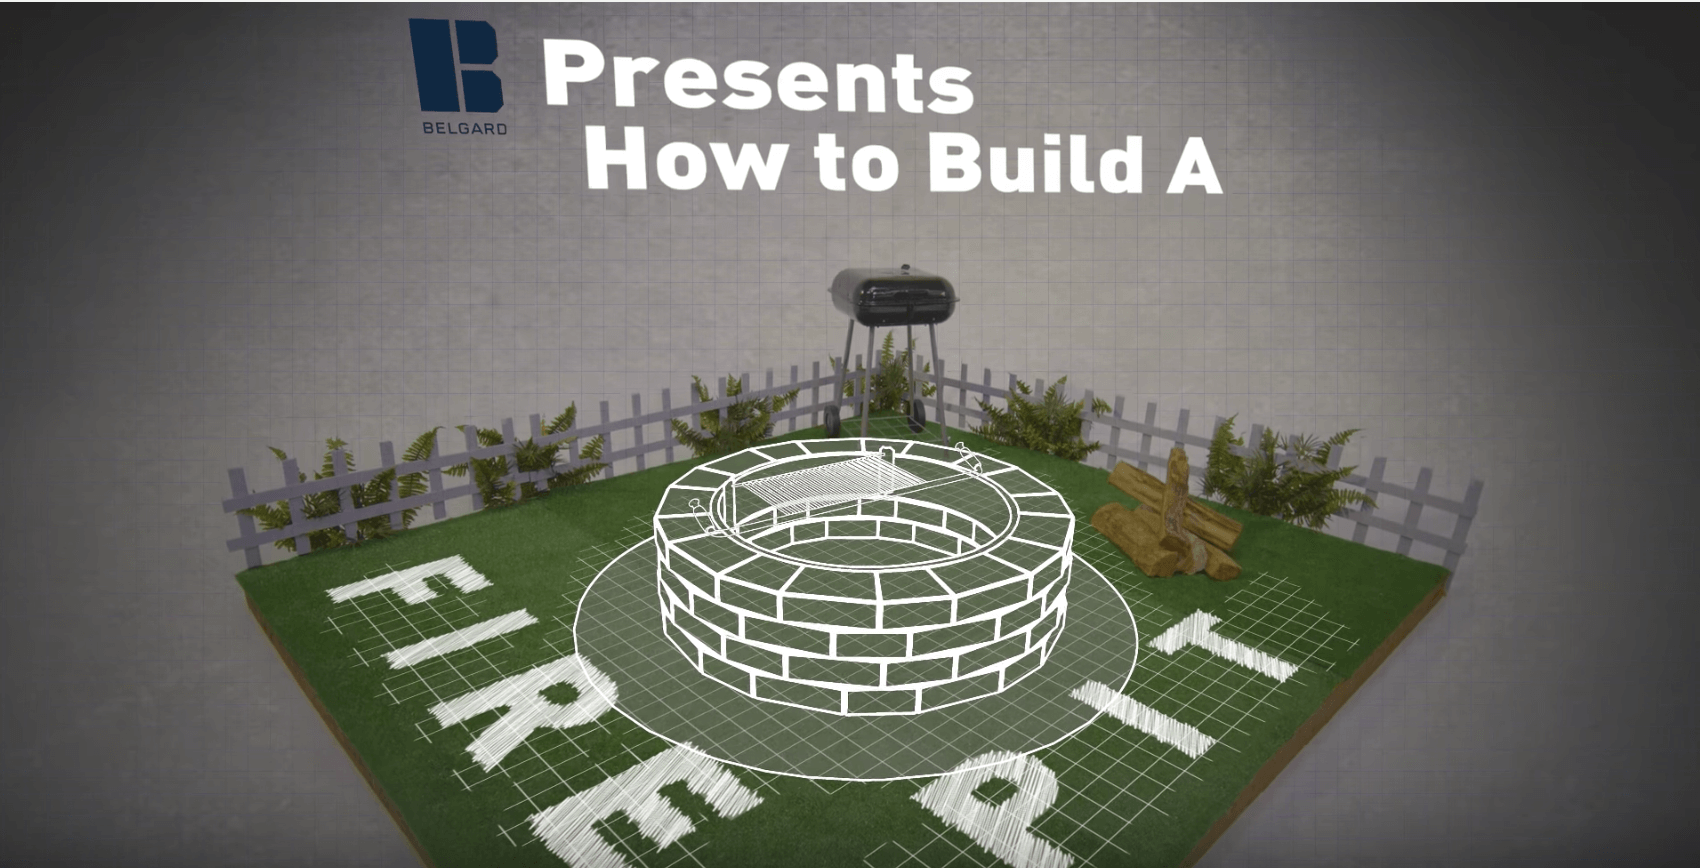 Belgard "How to Build a Fire Pit" video.